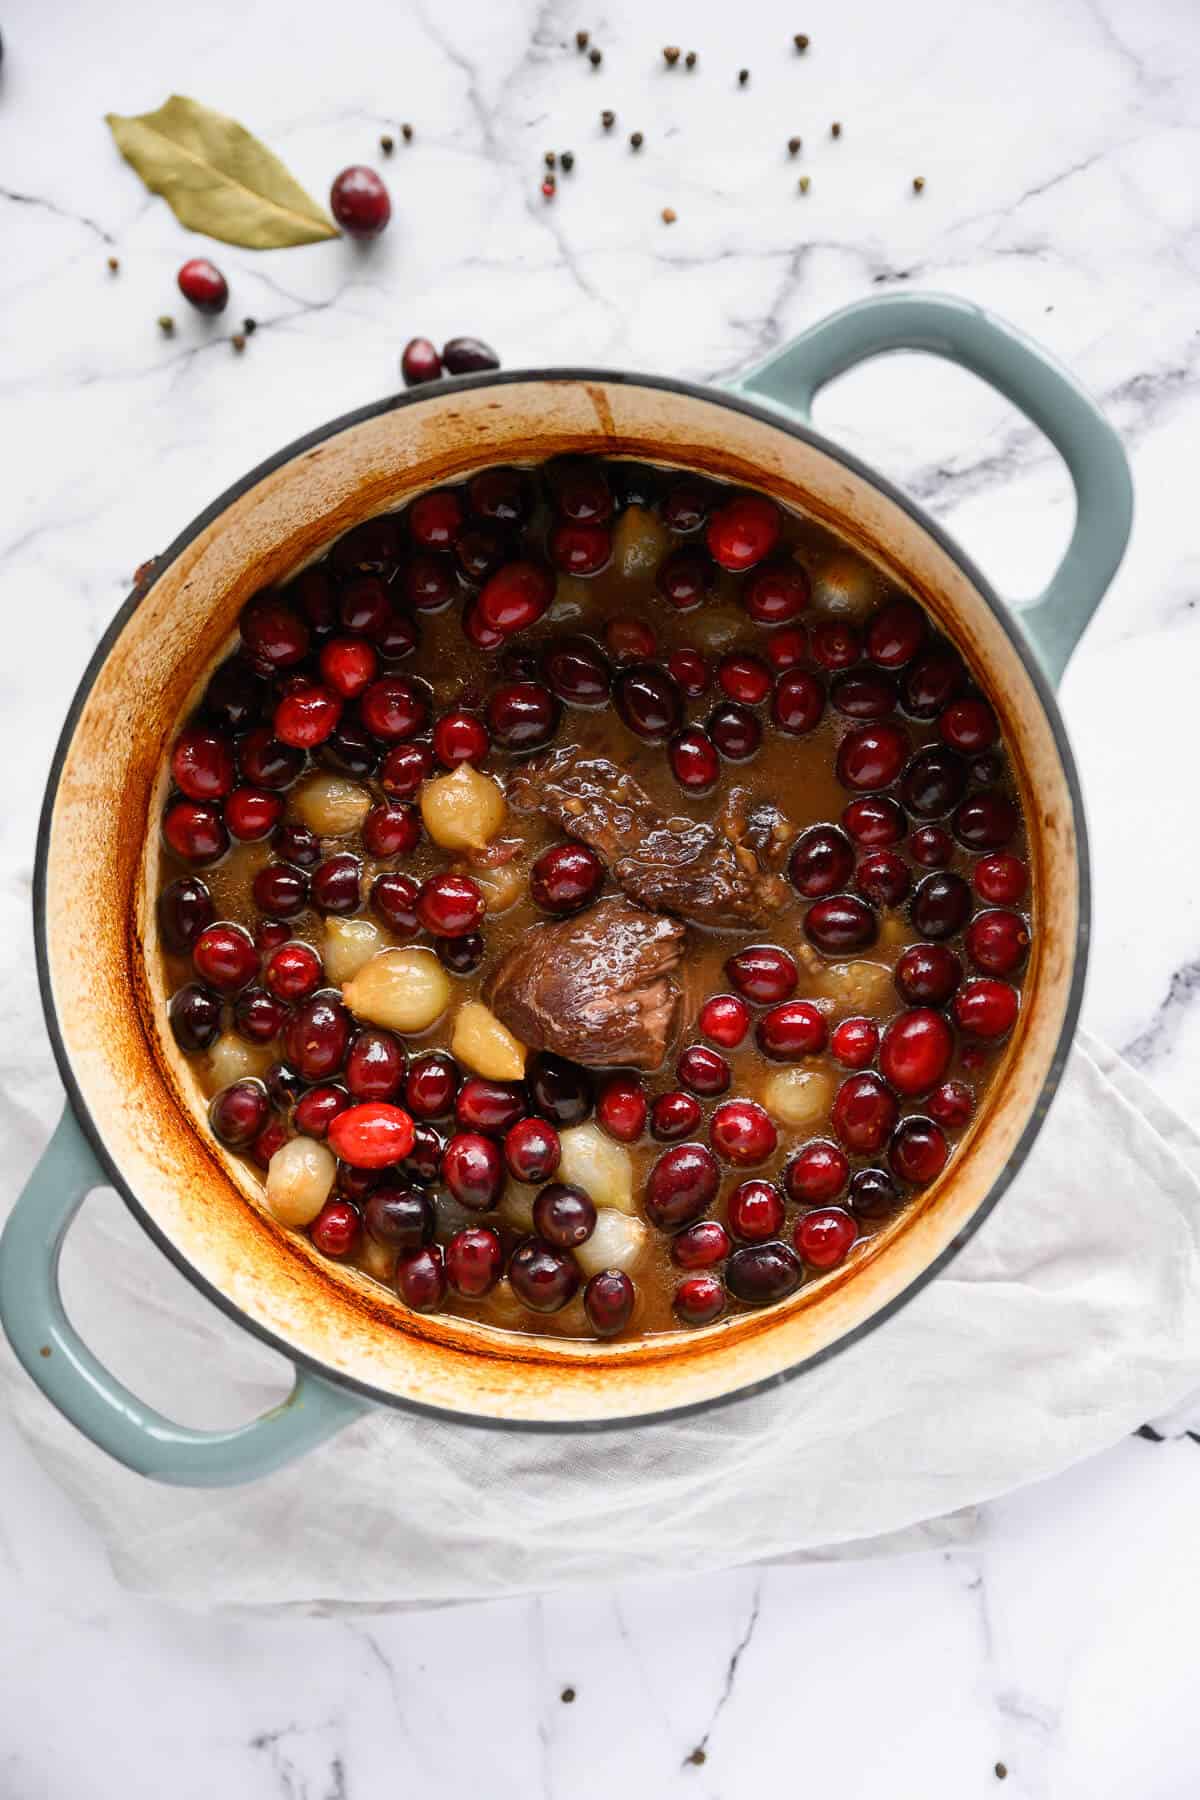 Braised Beef with Cranberries